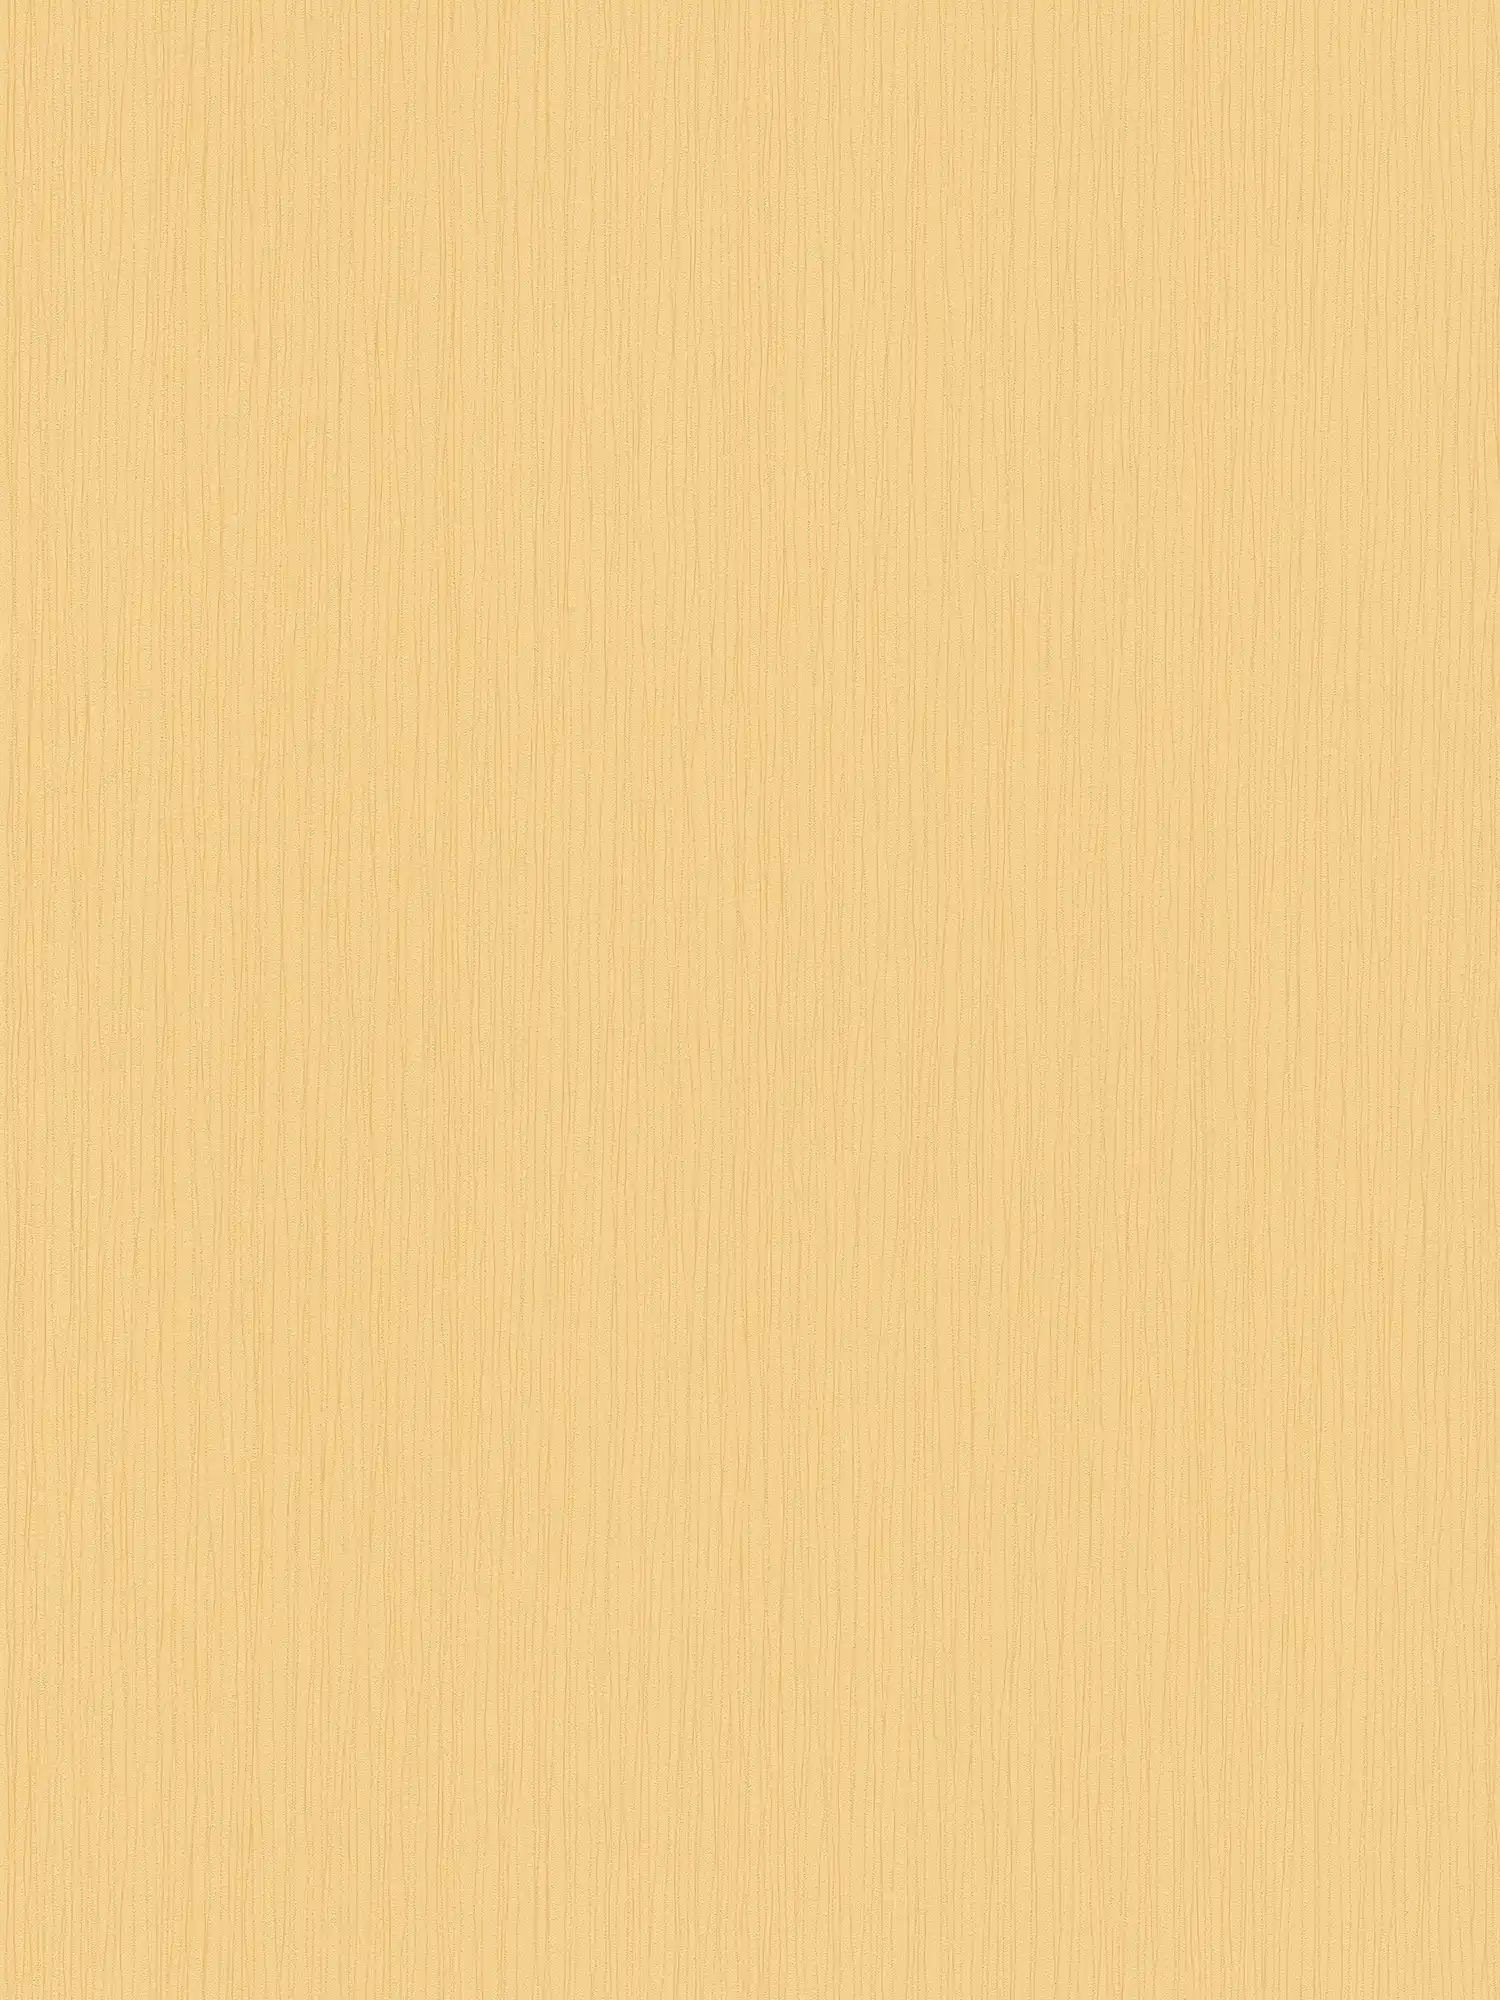 Plain wallpaper in sunny yellow with lines structure - yellow
